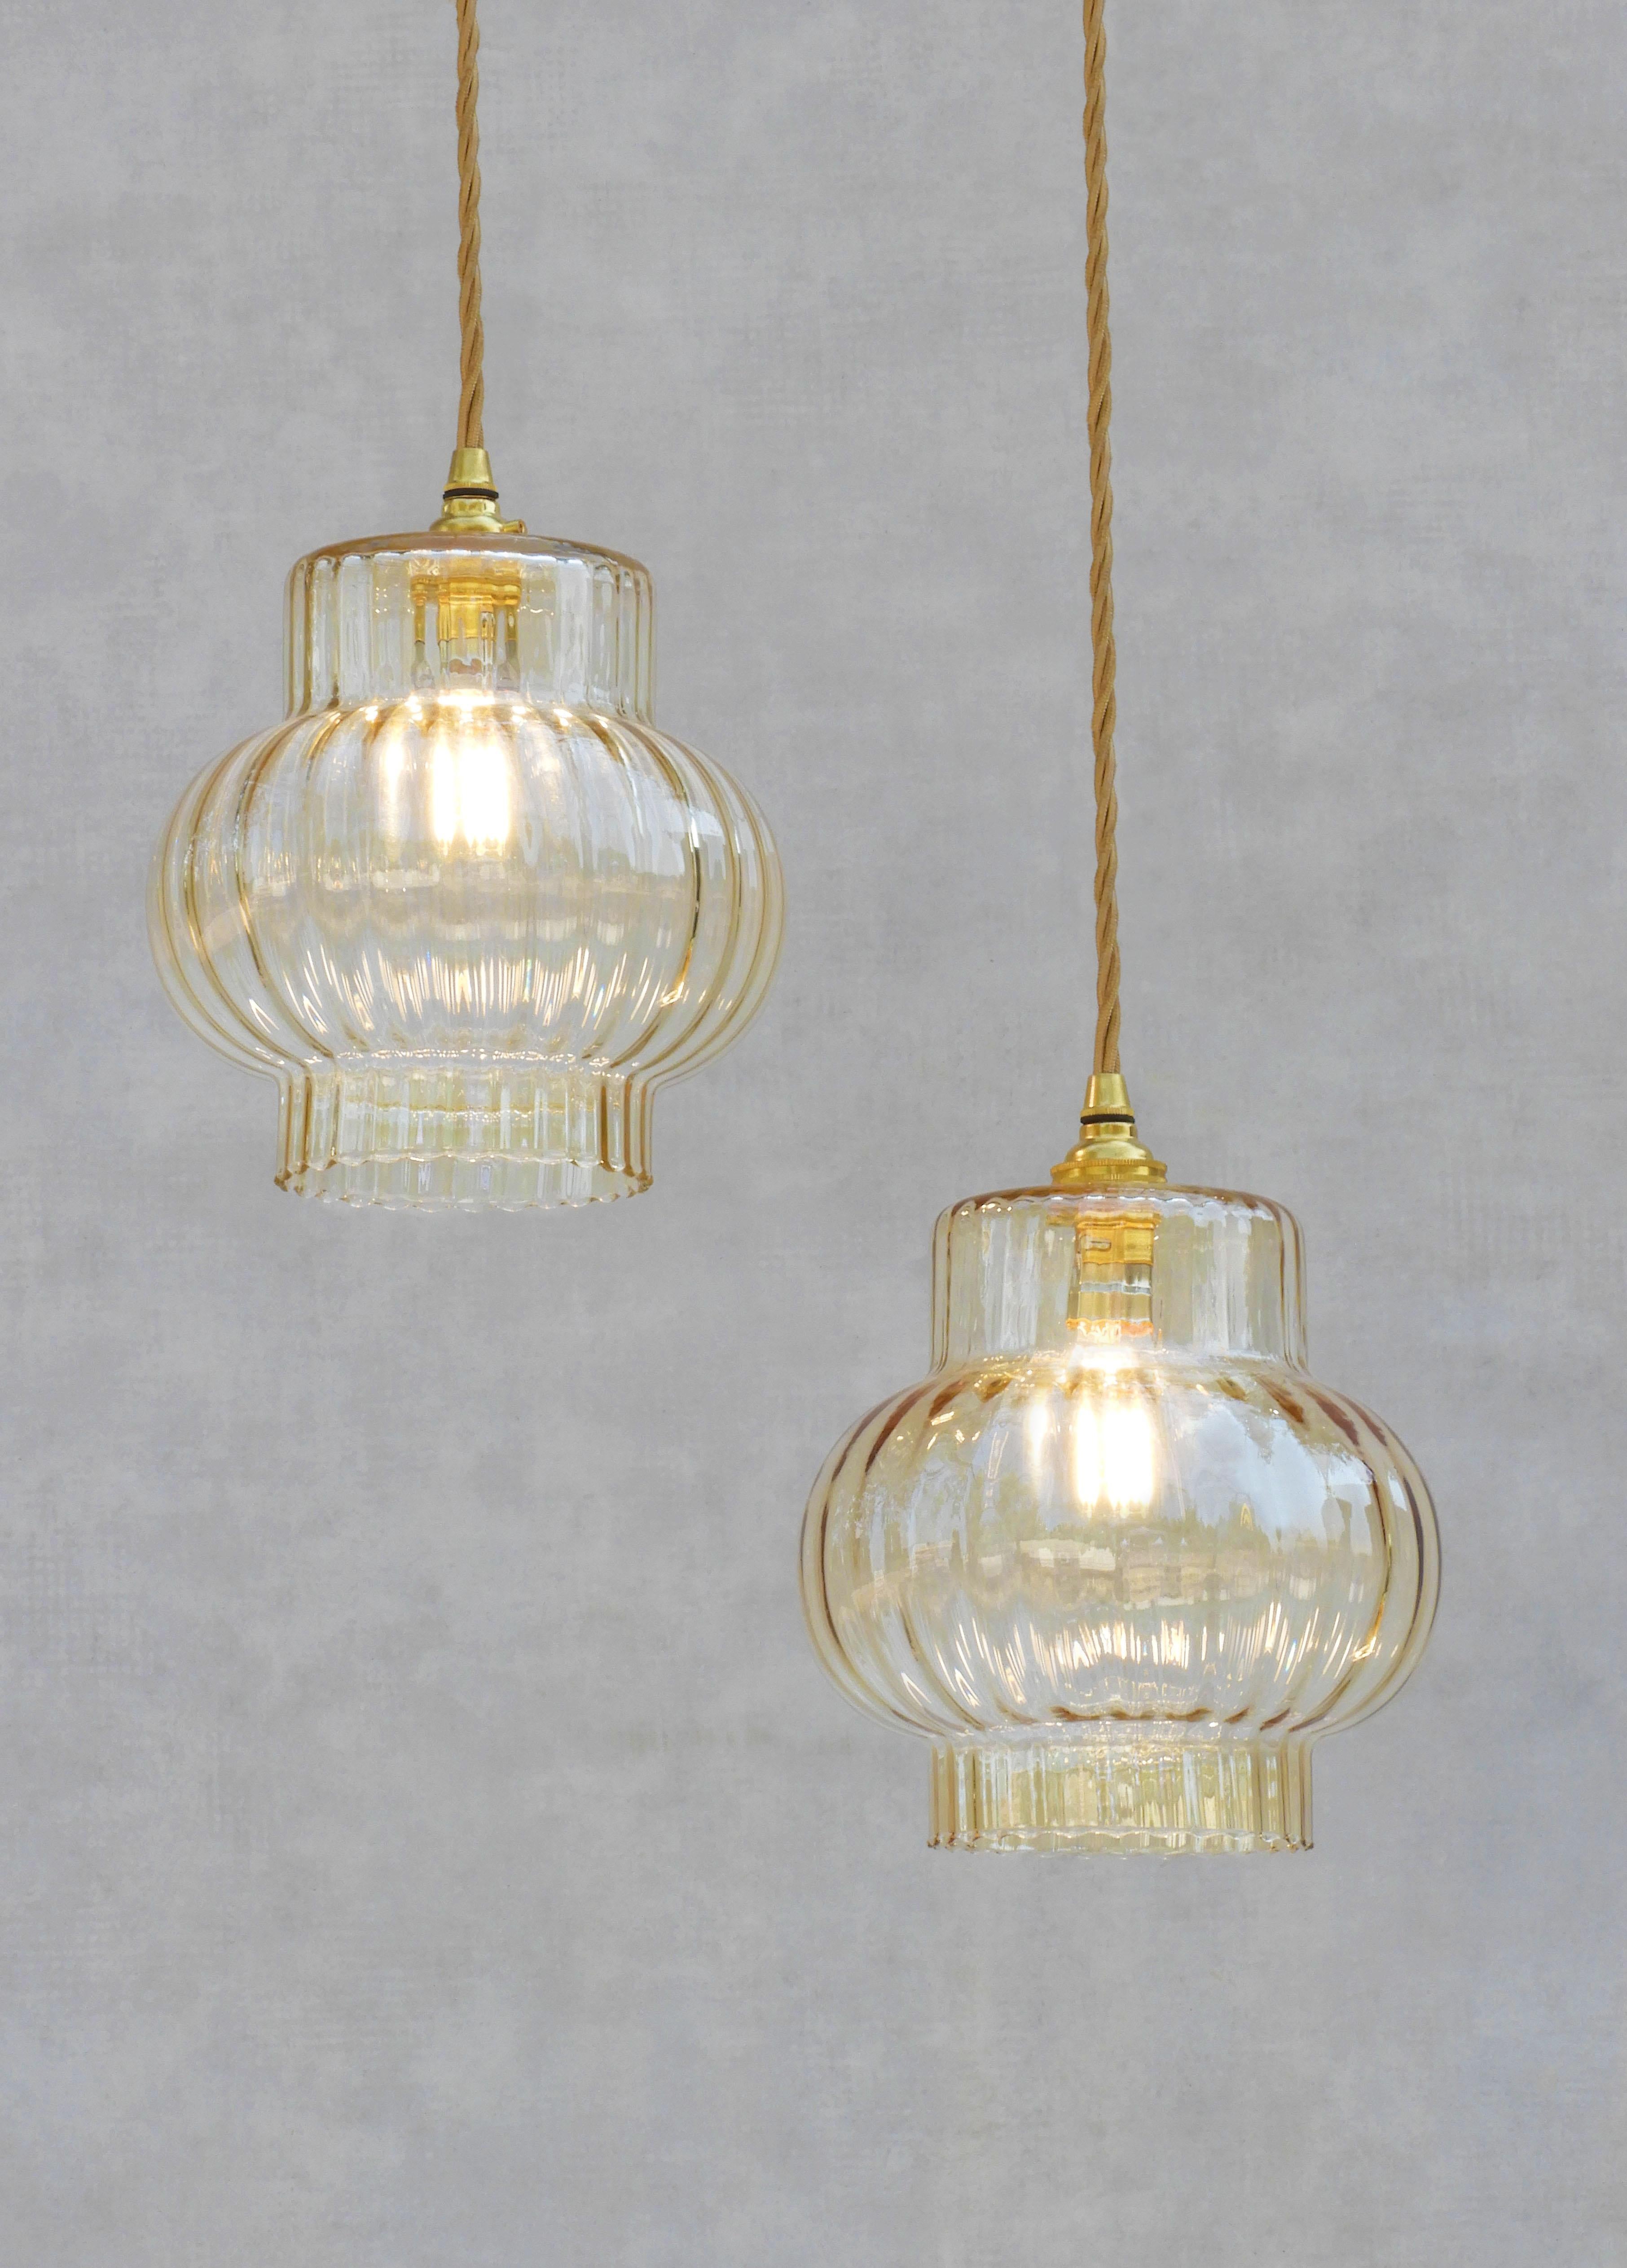 Pair French Mid Century Fluted Golden Amber Glass Pendant Lights FREE SHIPPING 2